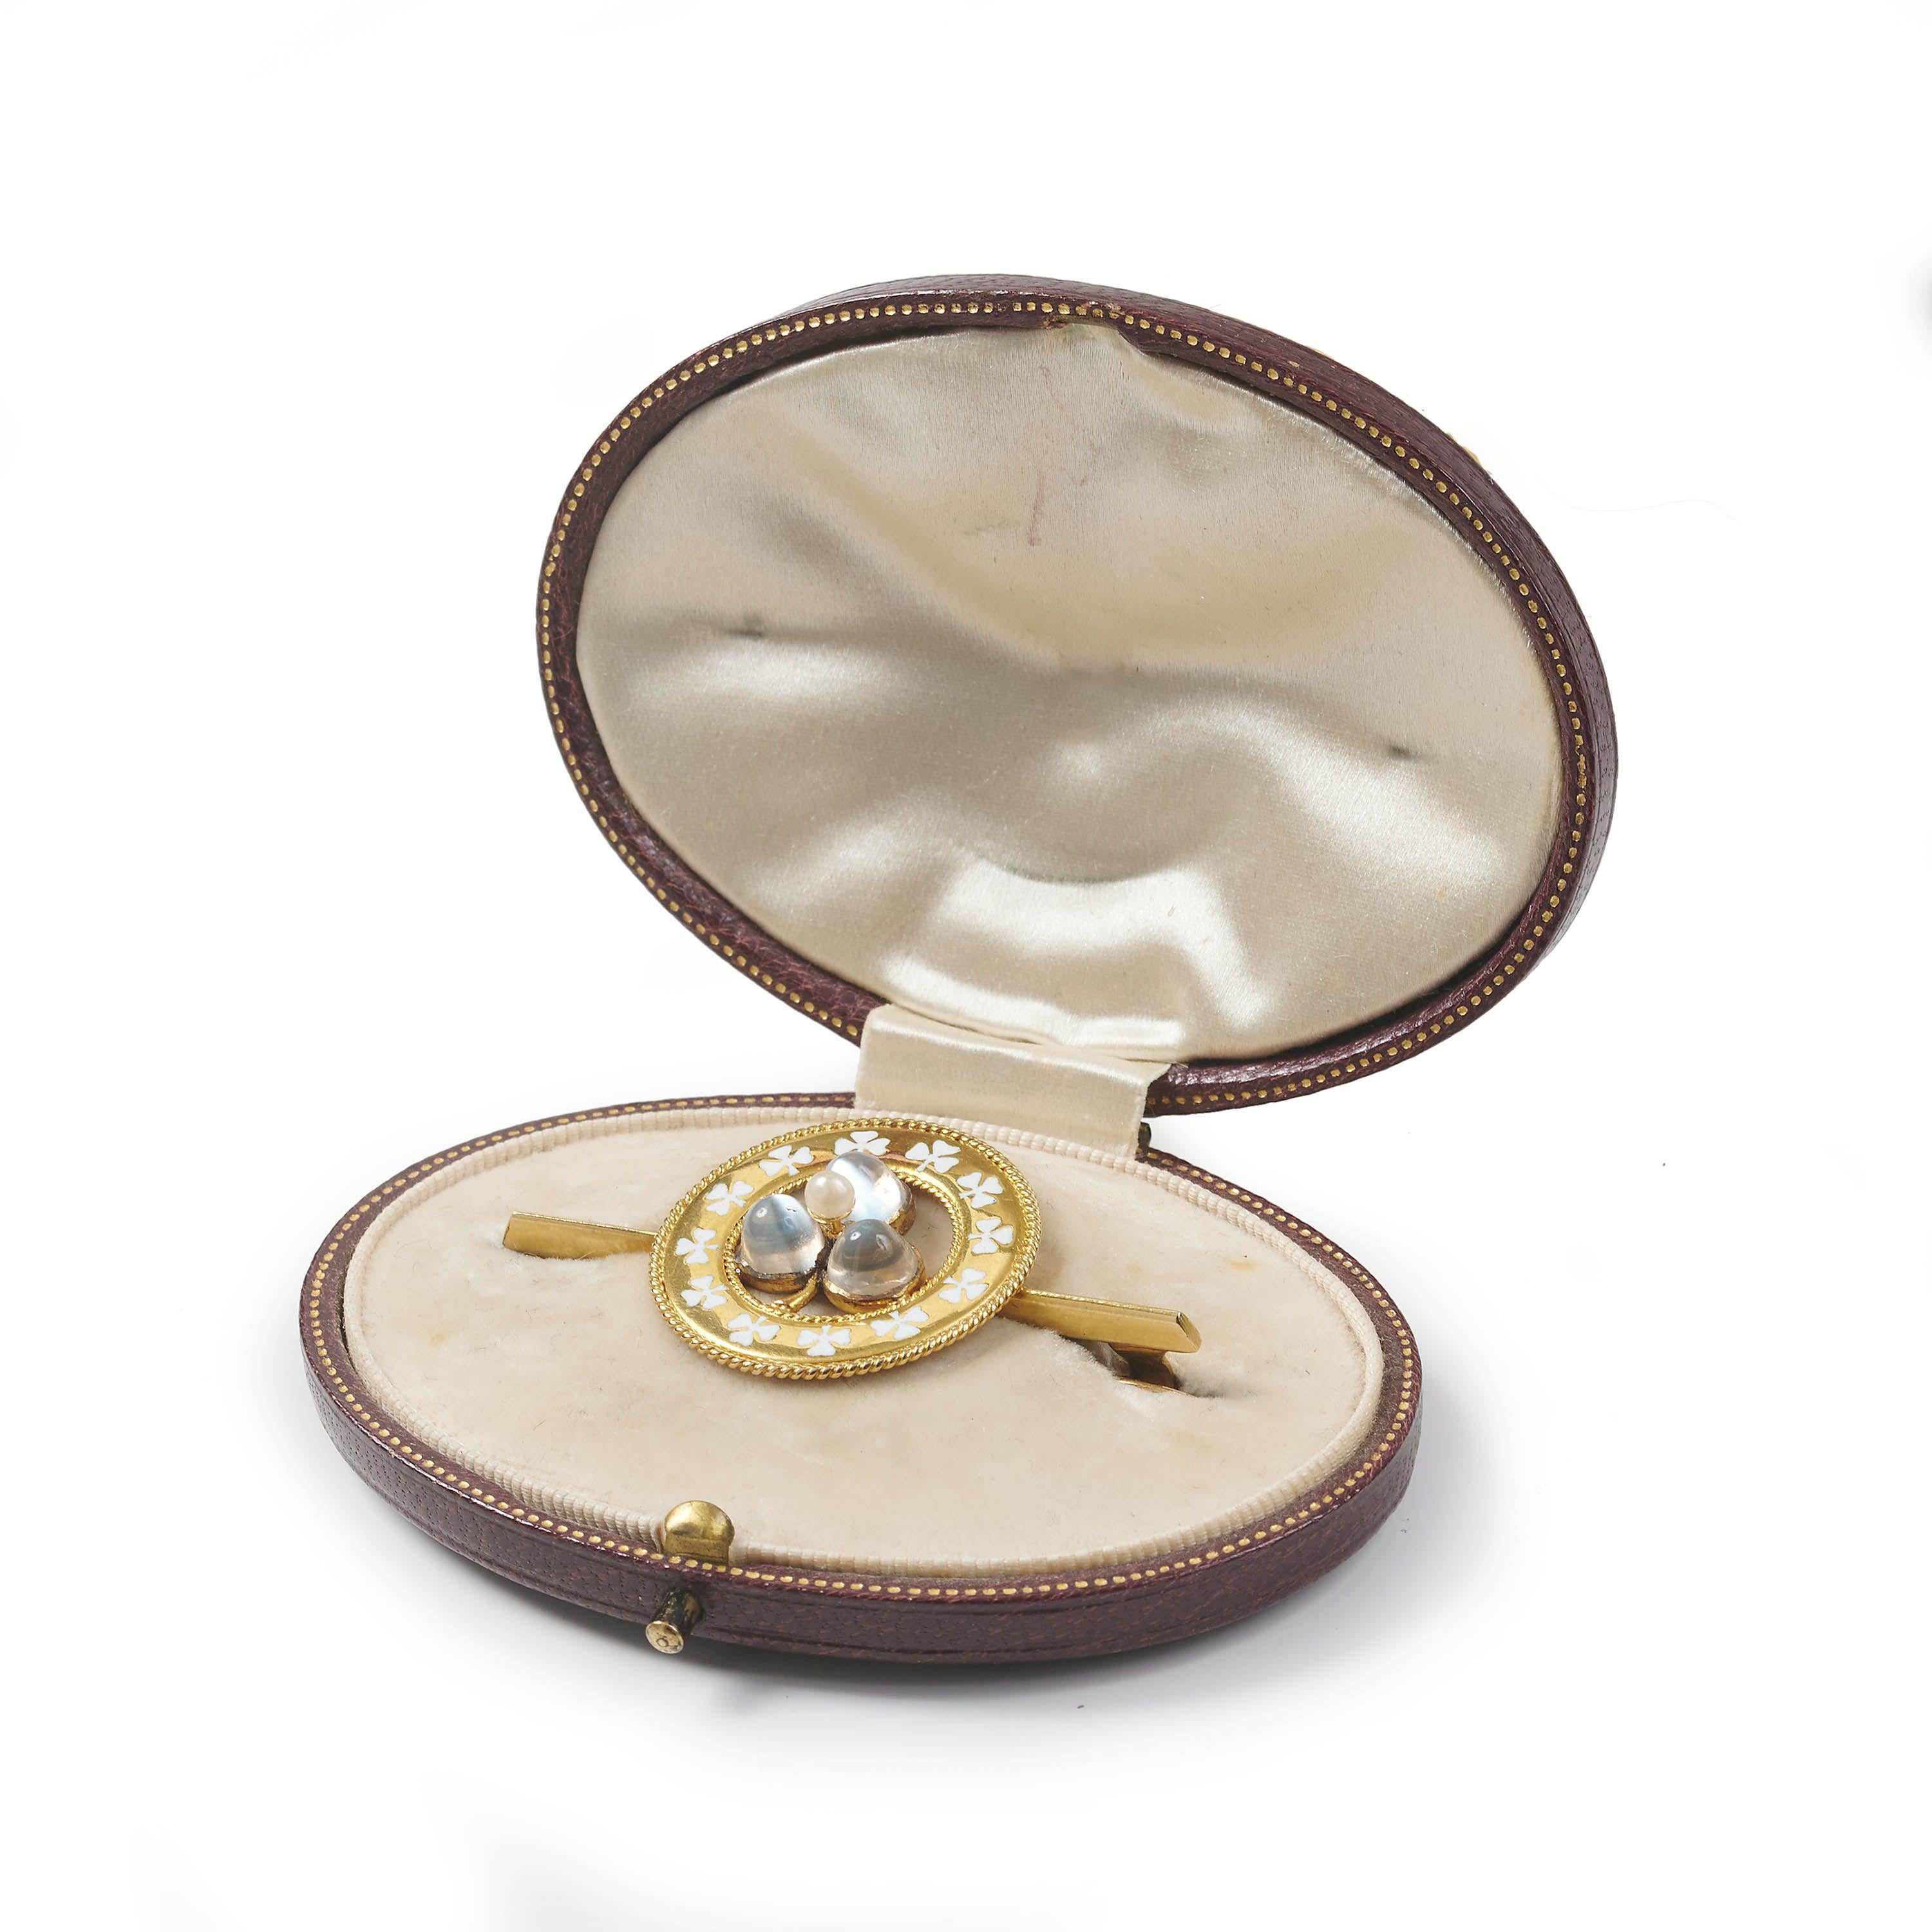 An antique lucky clover brooch, with a gold circle, edged with rope wirework, with white enamelled clover leaves, with a clover leaf in the centre, with a central natural pearl and three cabochon moonstone set leaves, in rub over settings, onto a